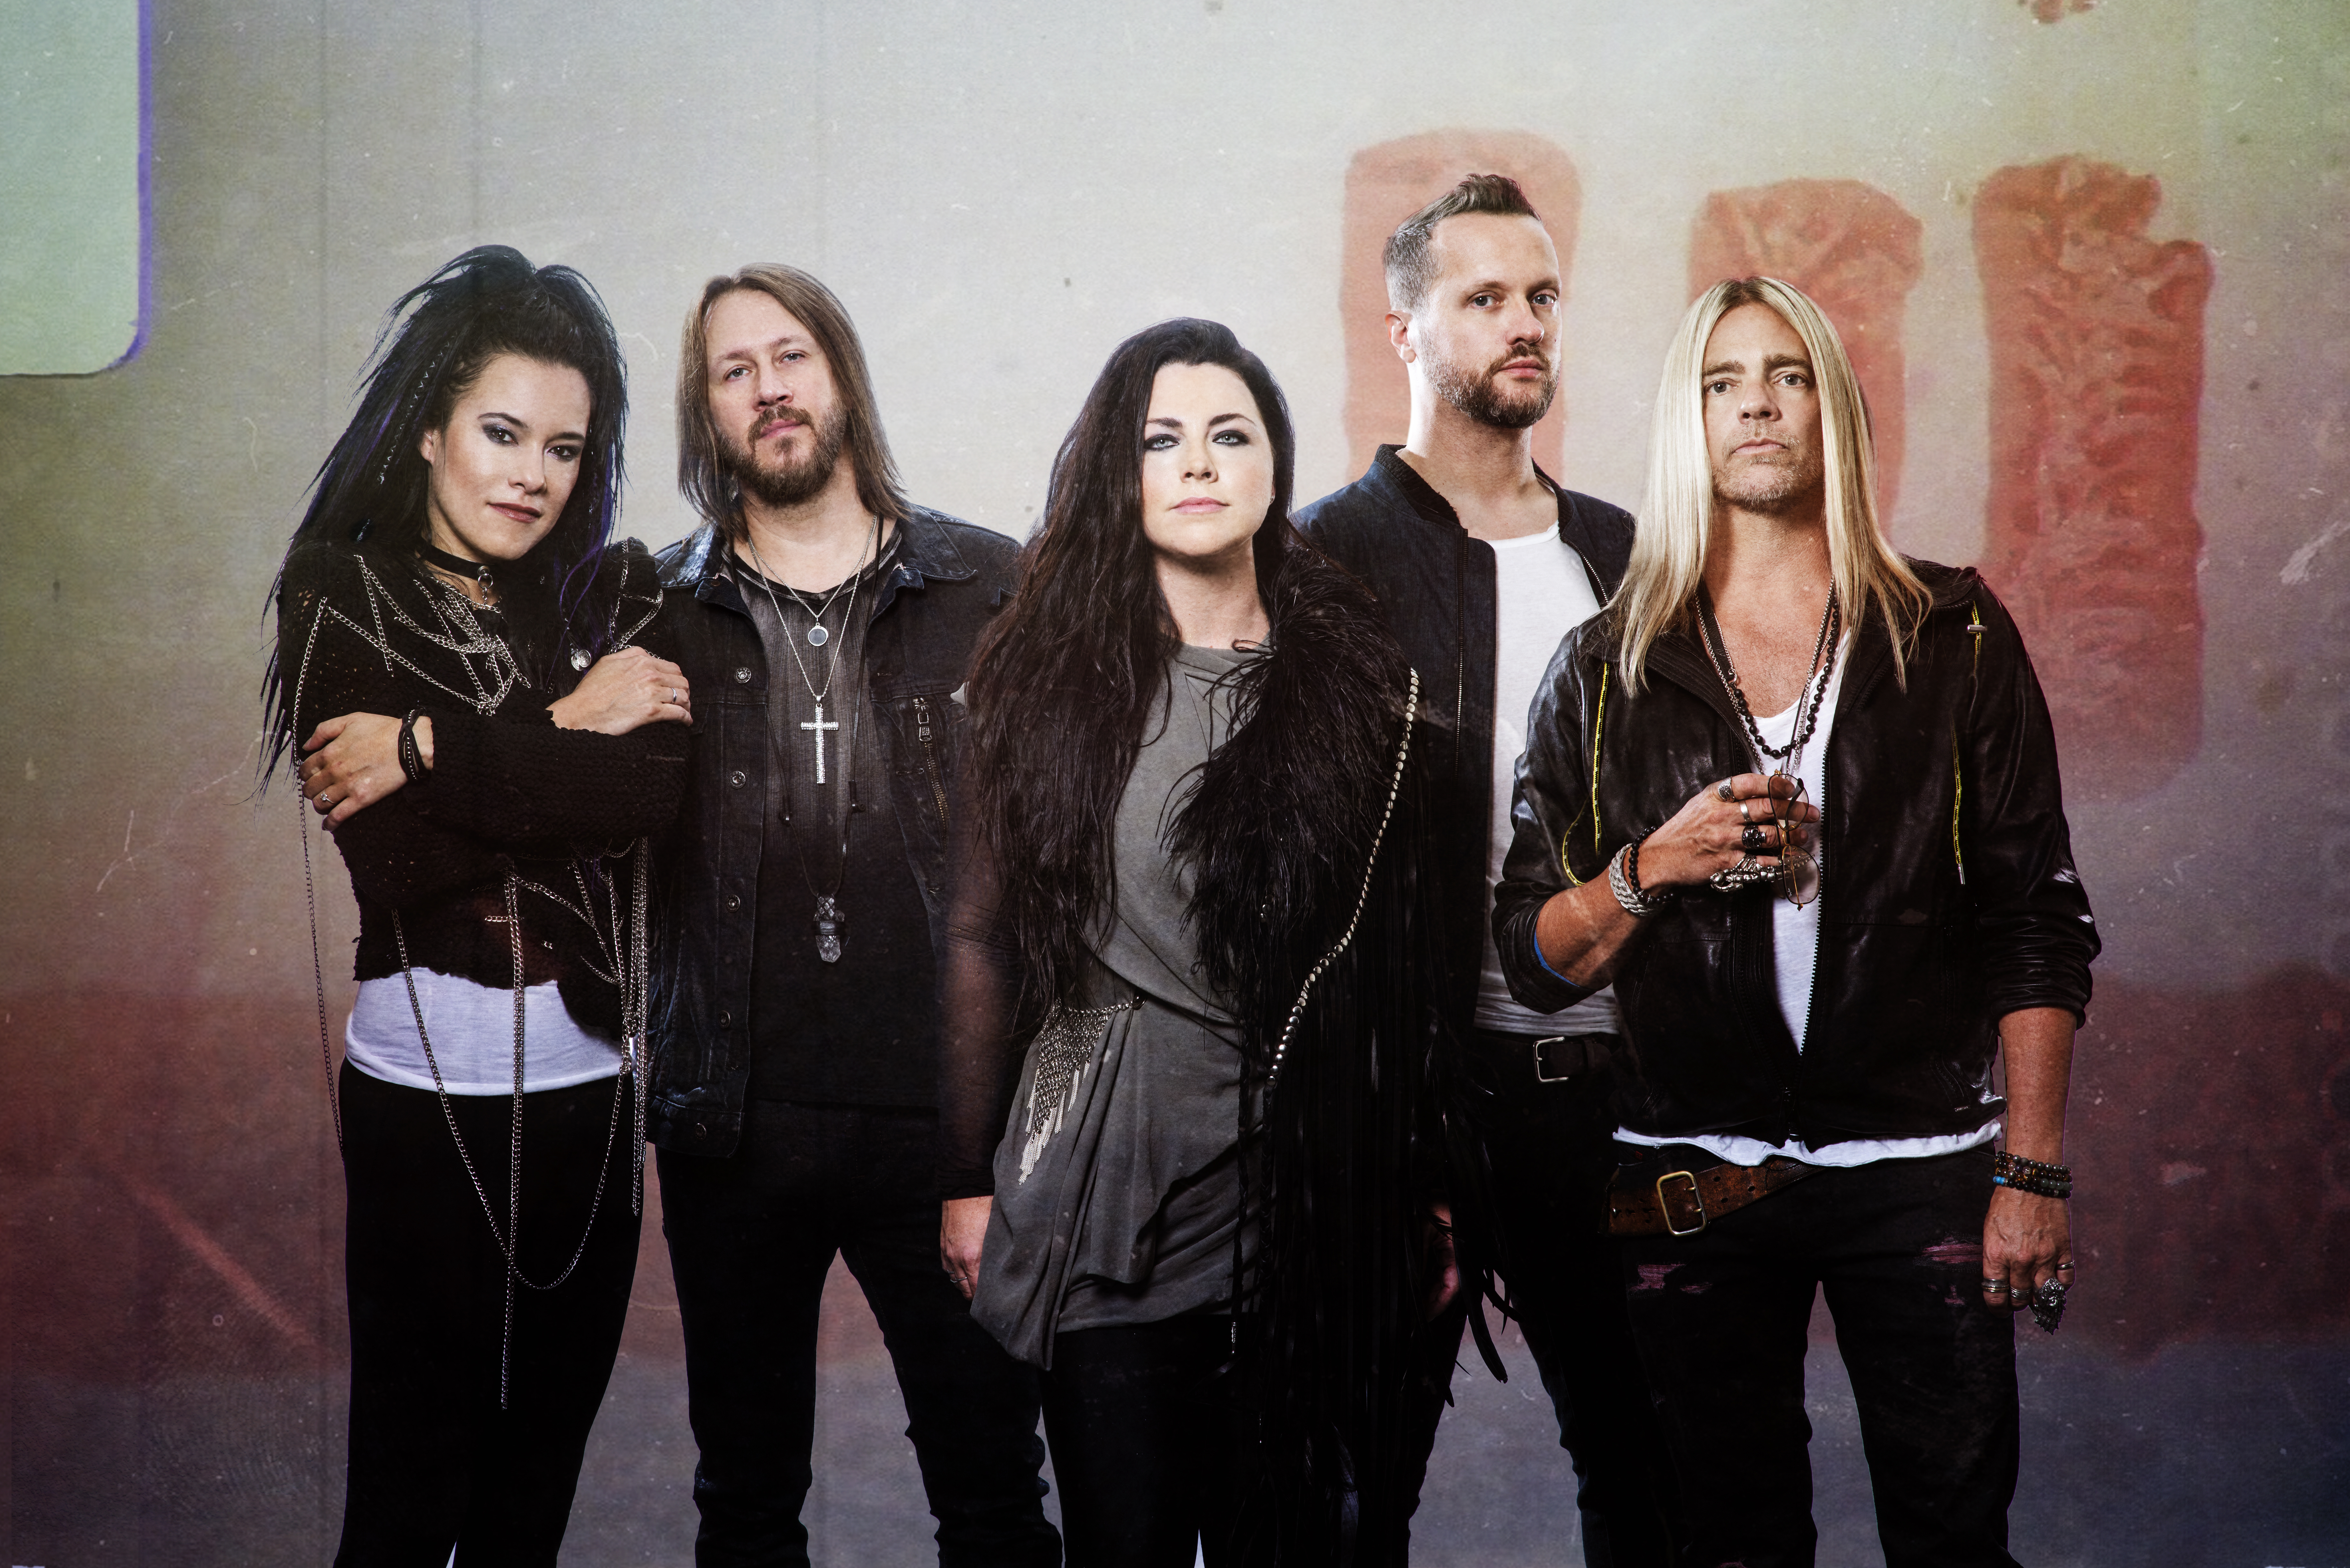 Evanescence & Rock's Top Women Release "Use My Voice"